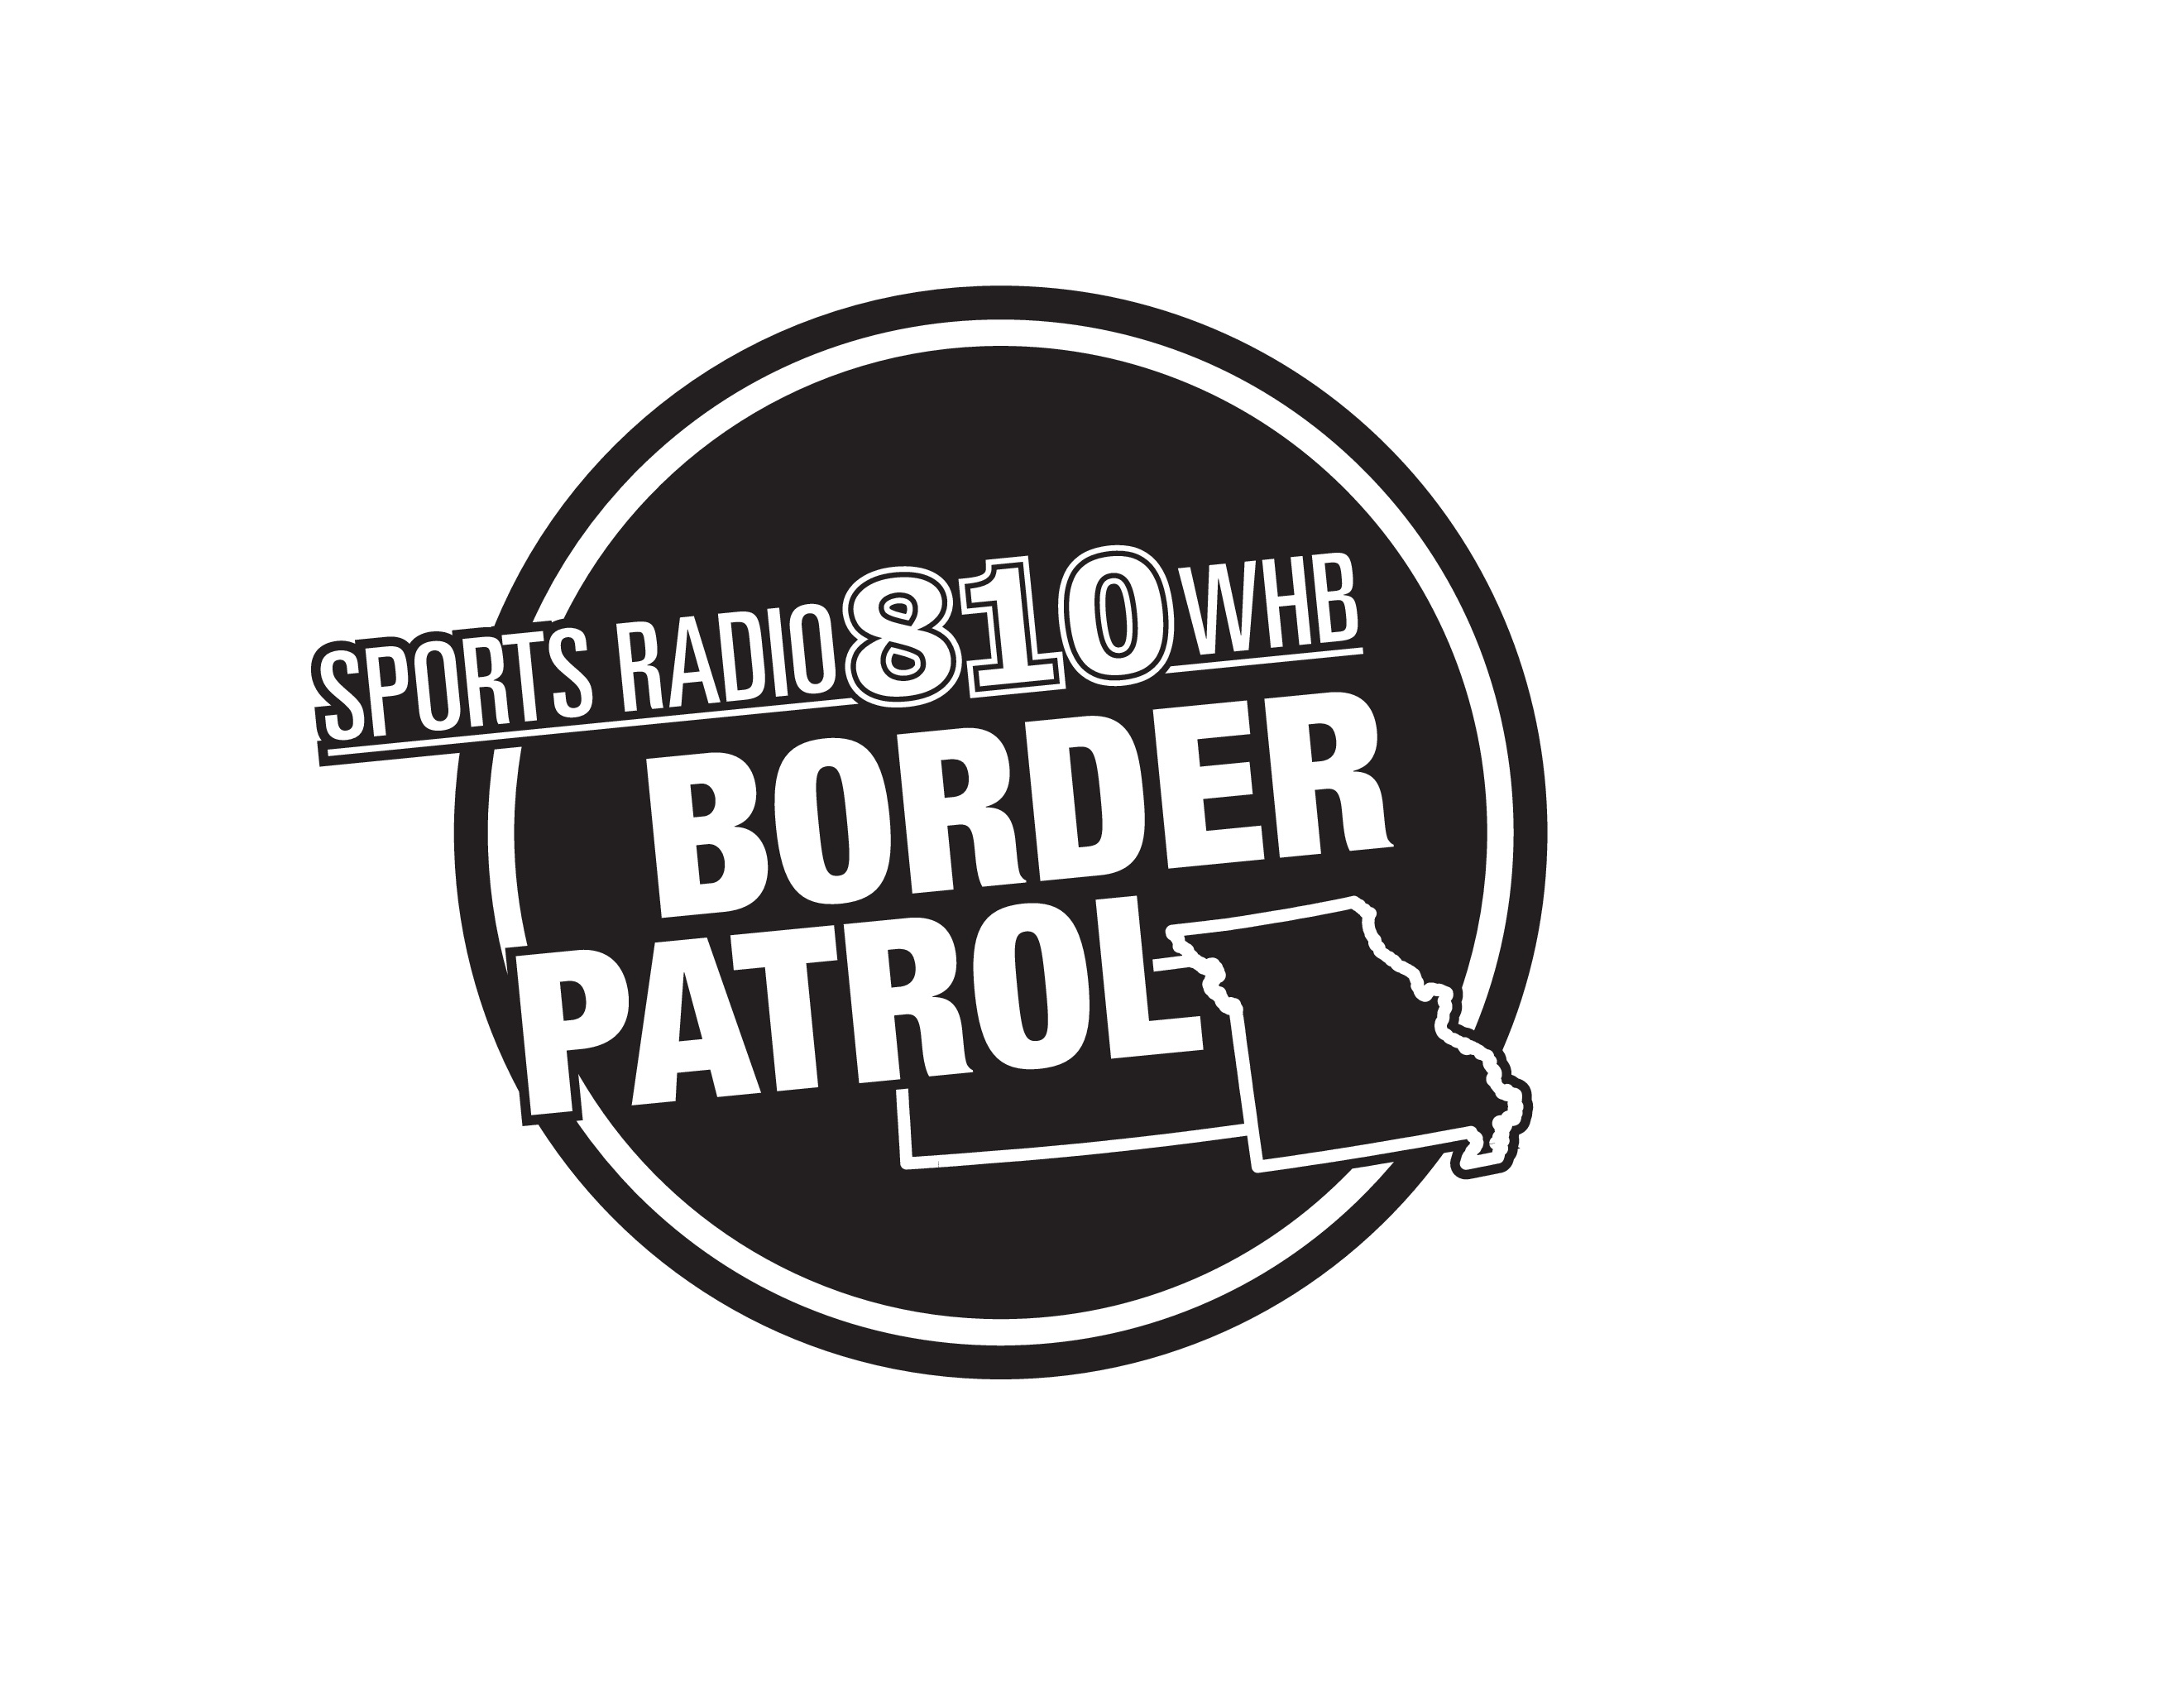 5-19-22 HR 1 of The Border Patrol on 38 The Spot